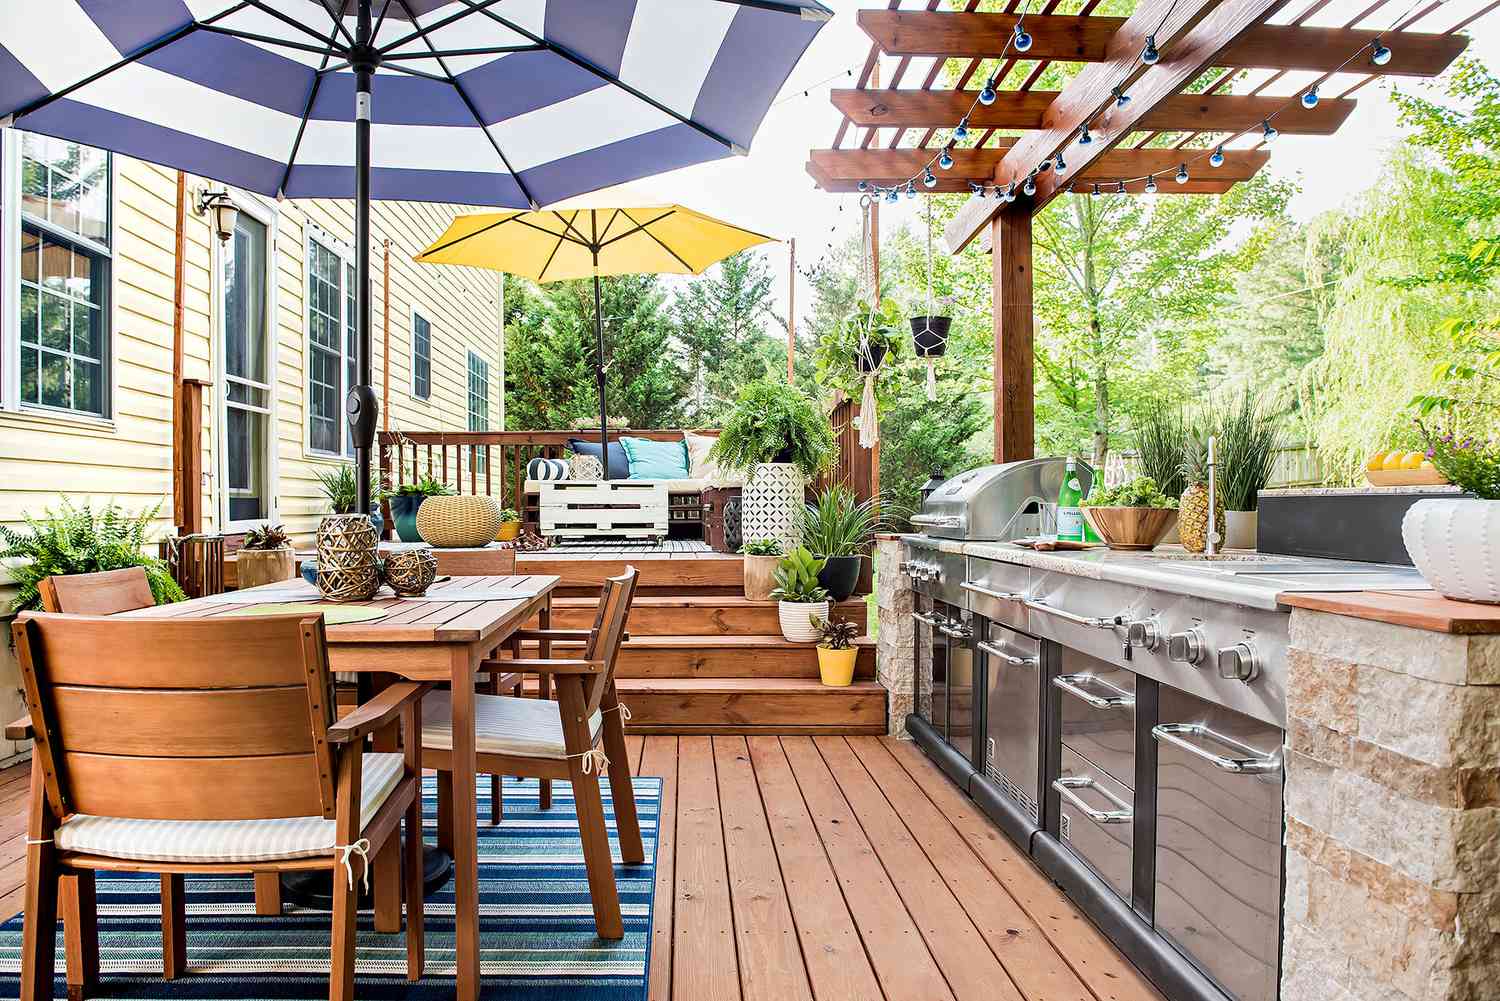 How to Choose the Best Deck Stain